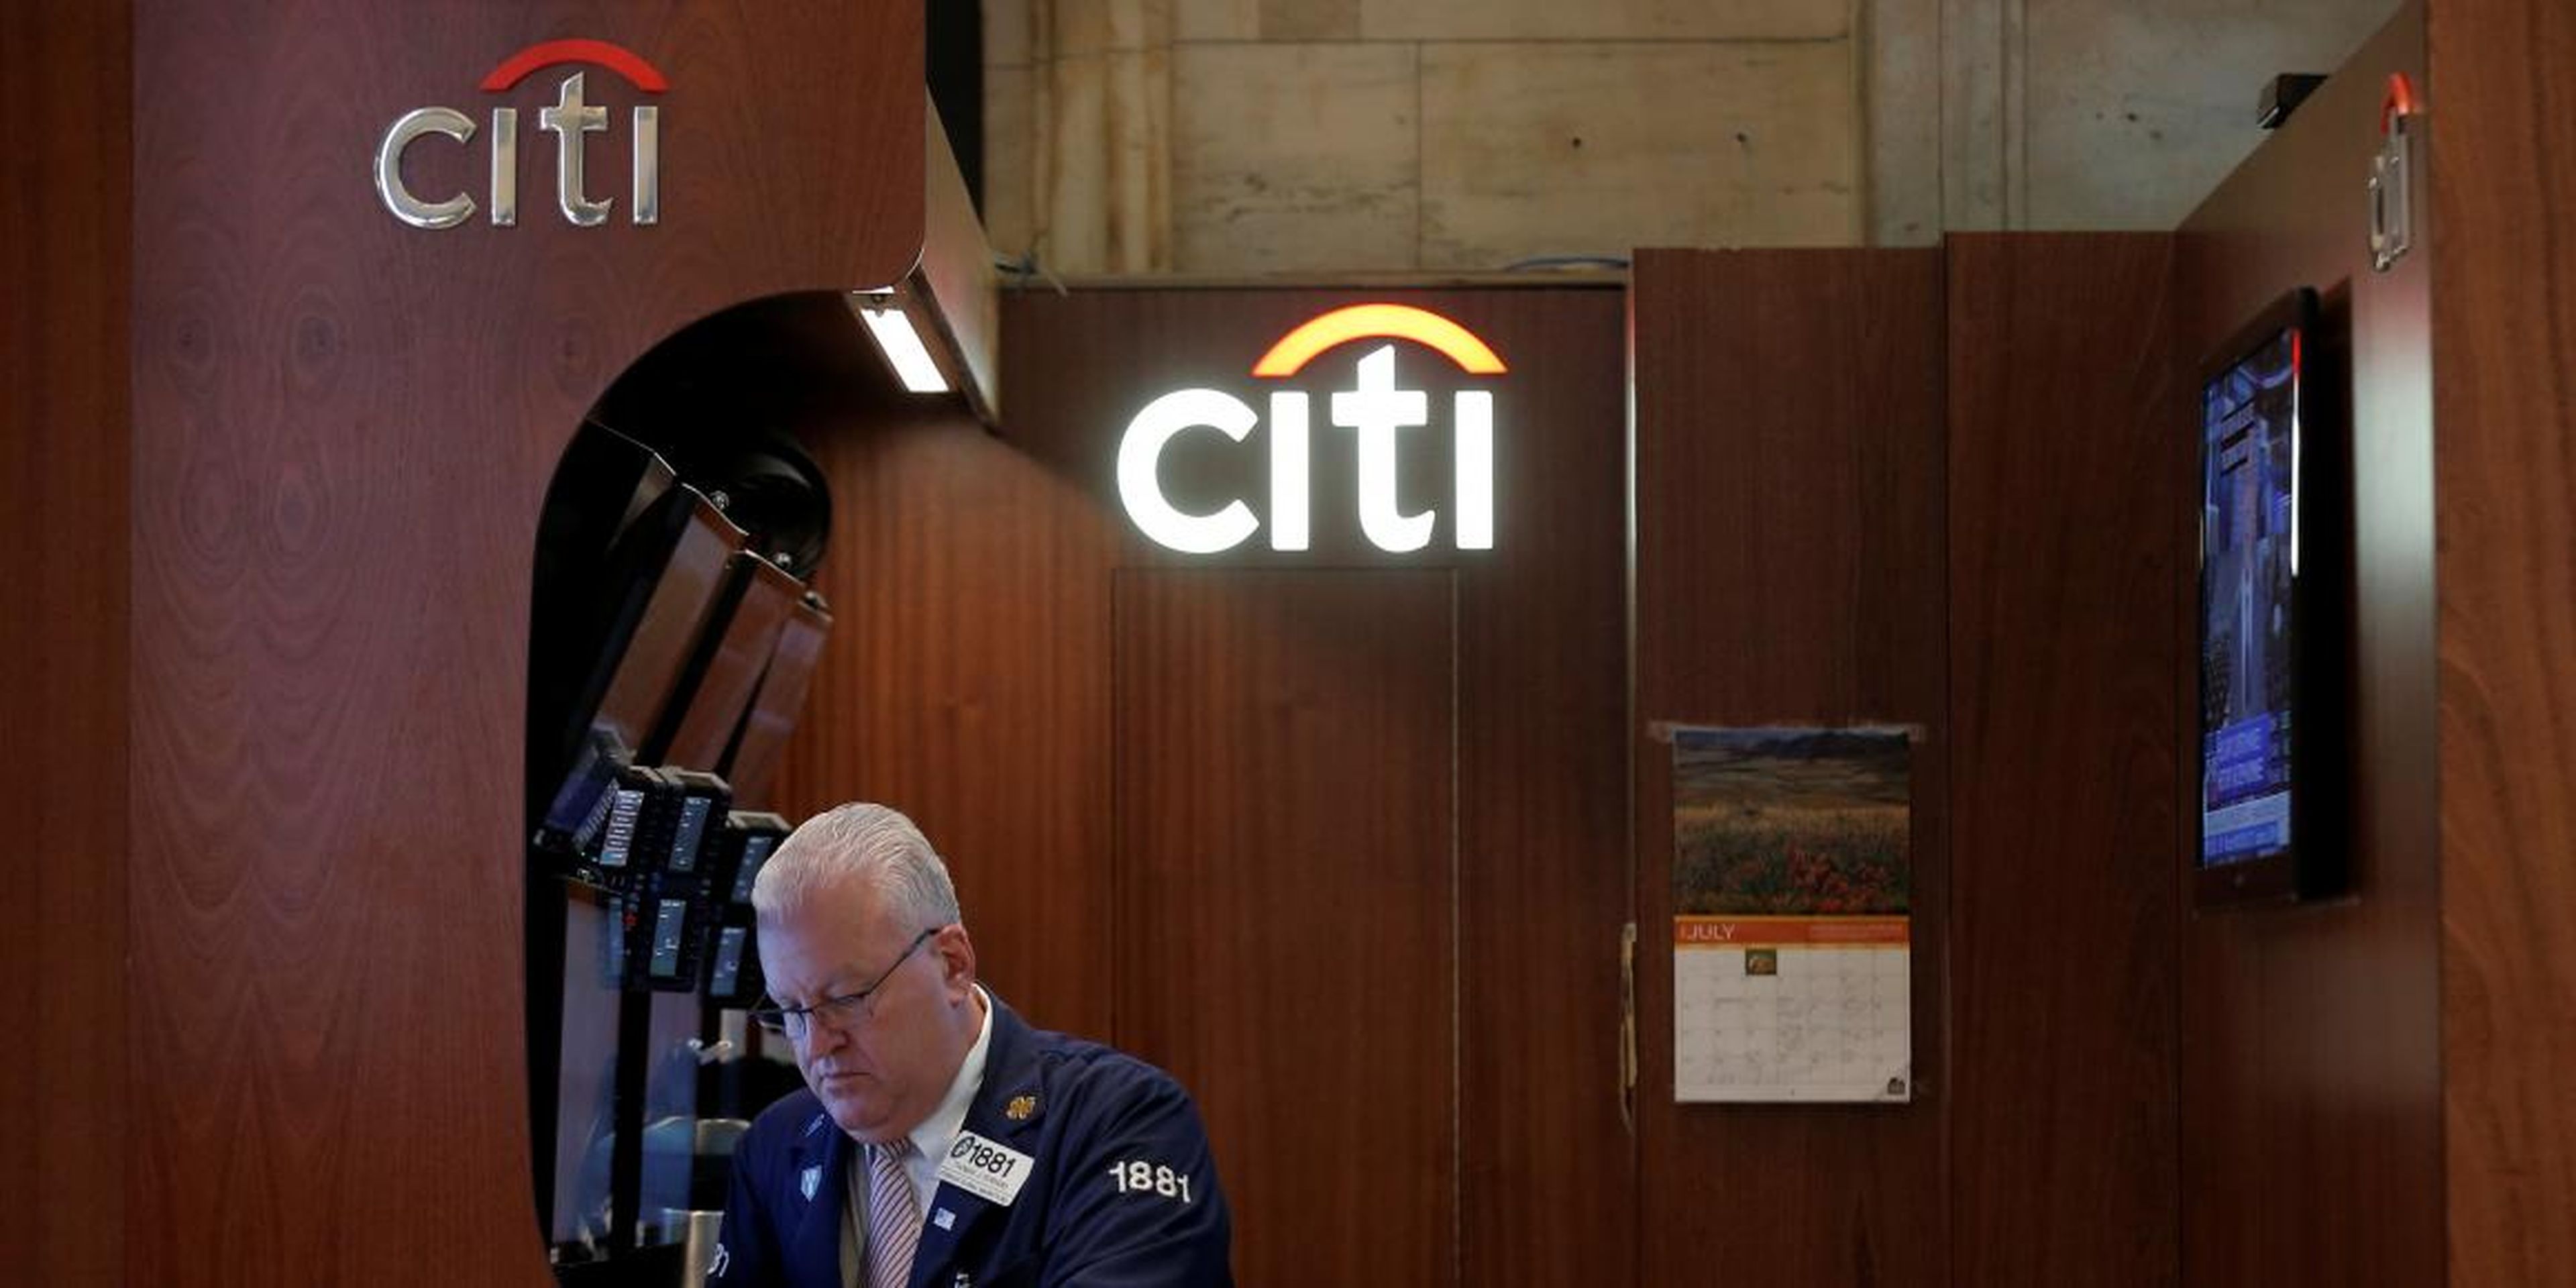 Citi trader Thomas Ferrigno works in his company's booth on the floor of the New York Stock Exchange (NYSE) in New York City, U.S., July 27, 2016.